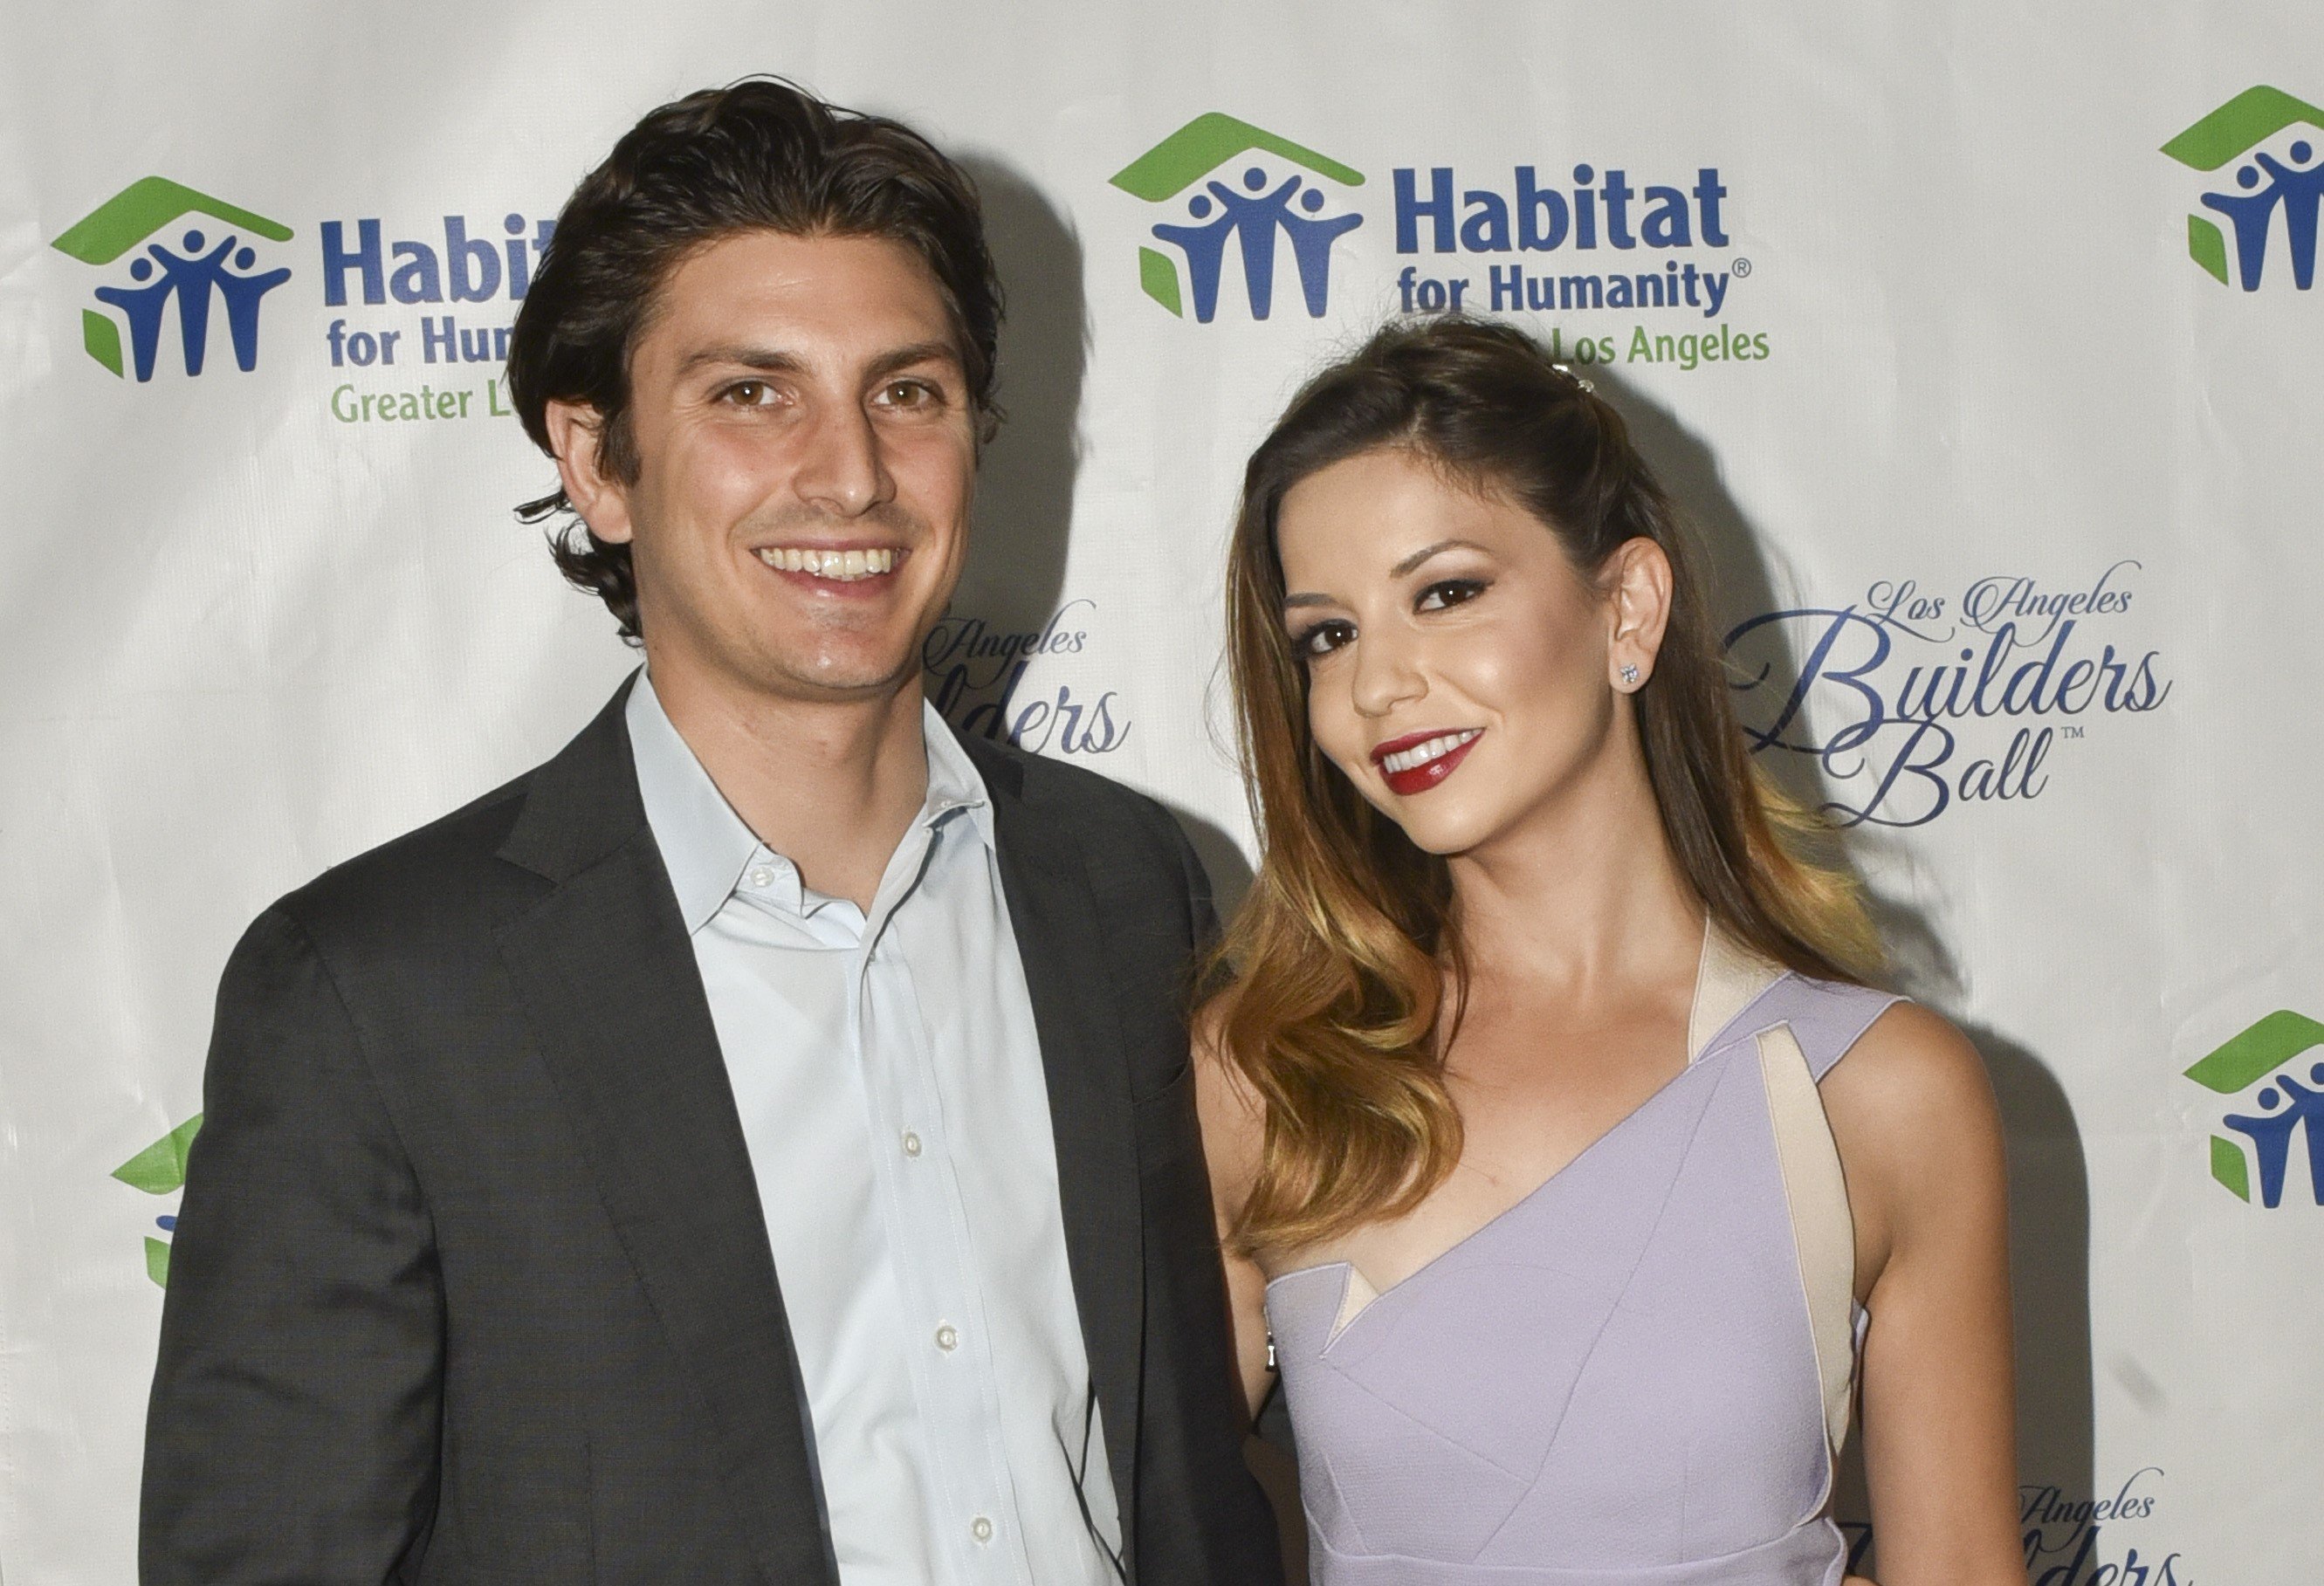 Masiela Lusha and husband Ramzi Habibi at the Habitat LA 2016 Los Angeles Builders Ball in 2016, in Beverly Hills, California. | Source: Getty Images